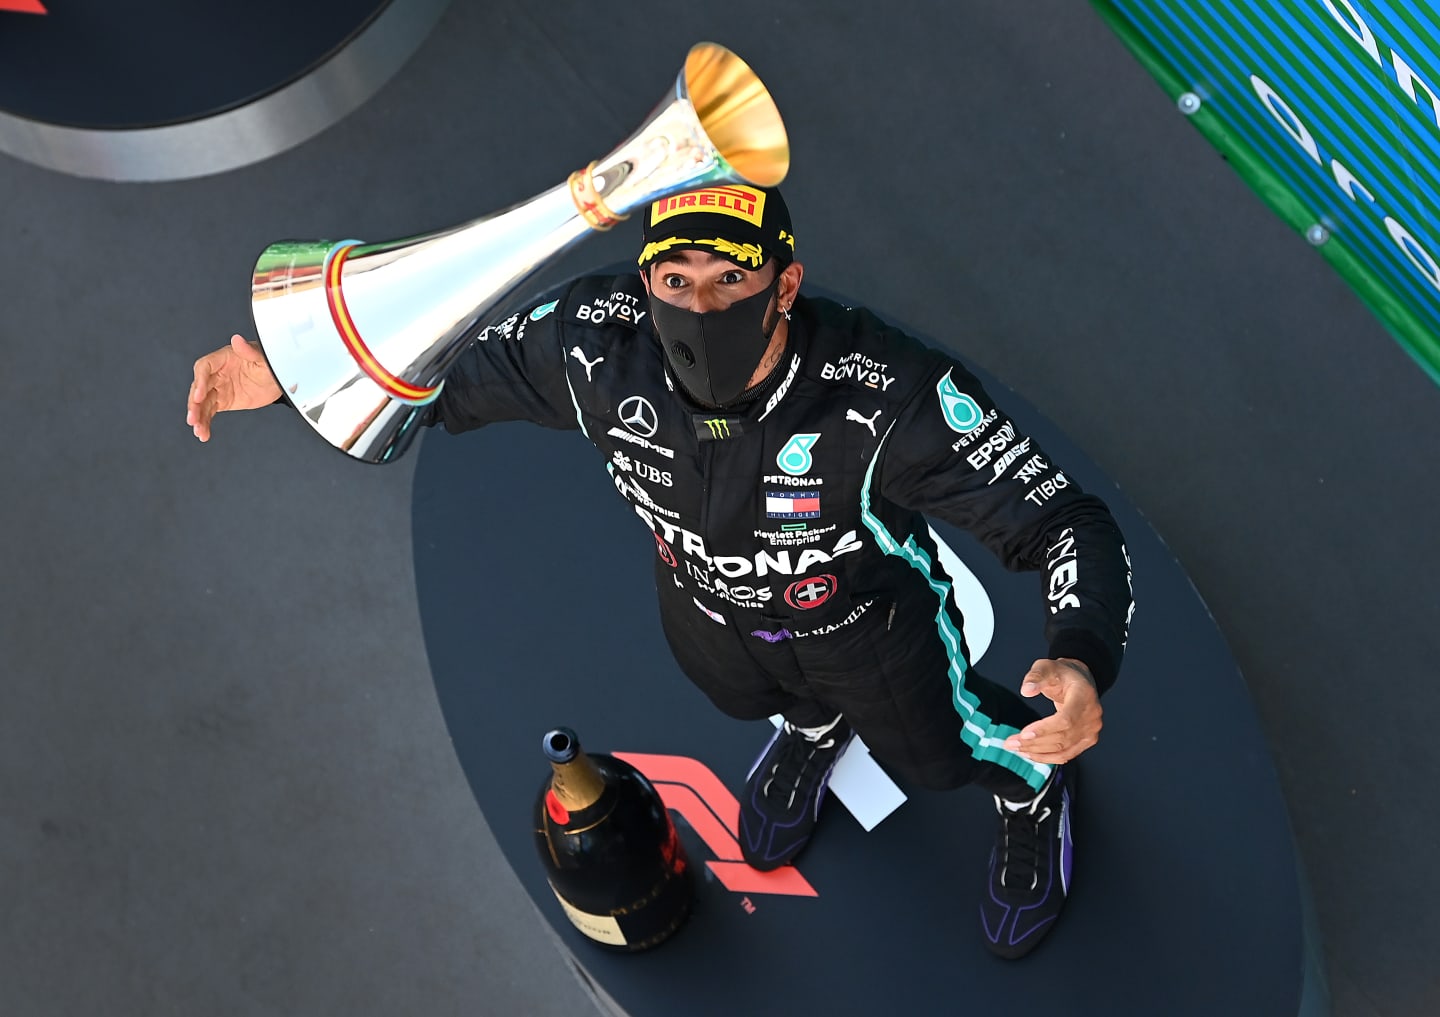 BARCELONA, SPAIN - AUGUST 16: Race winner Lewis Hamilton of Great Britain and Mercedes GP celebrates on the podium by throwing his trophy in the air during the F1 Grand Prix of Spain at Circuit de Barcelona-Catalunya on August 16, 2020 in Barcelona, Spain. (Photo by Clive Mason - Formula 1/Formula 1 via Getty Images)